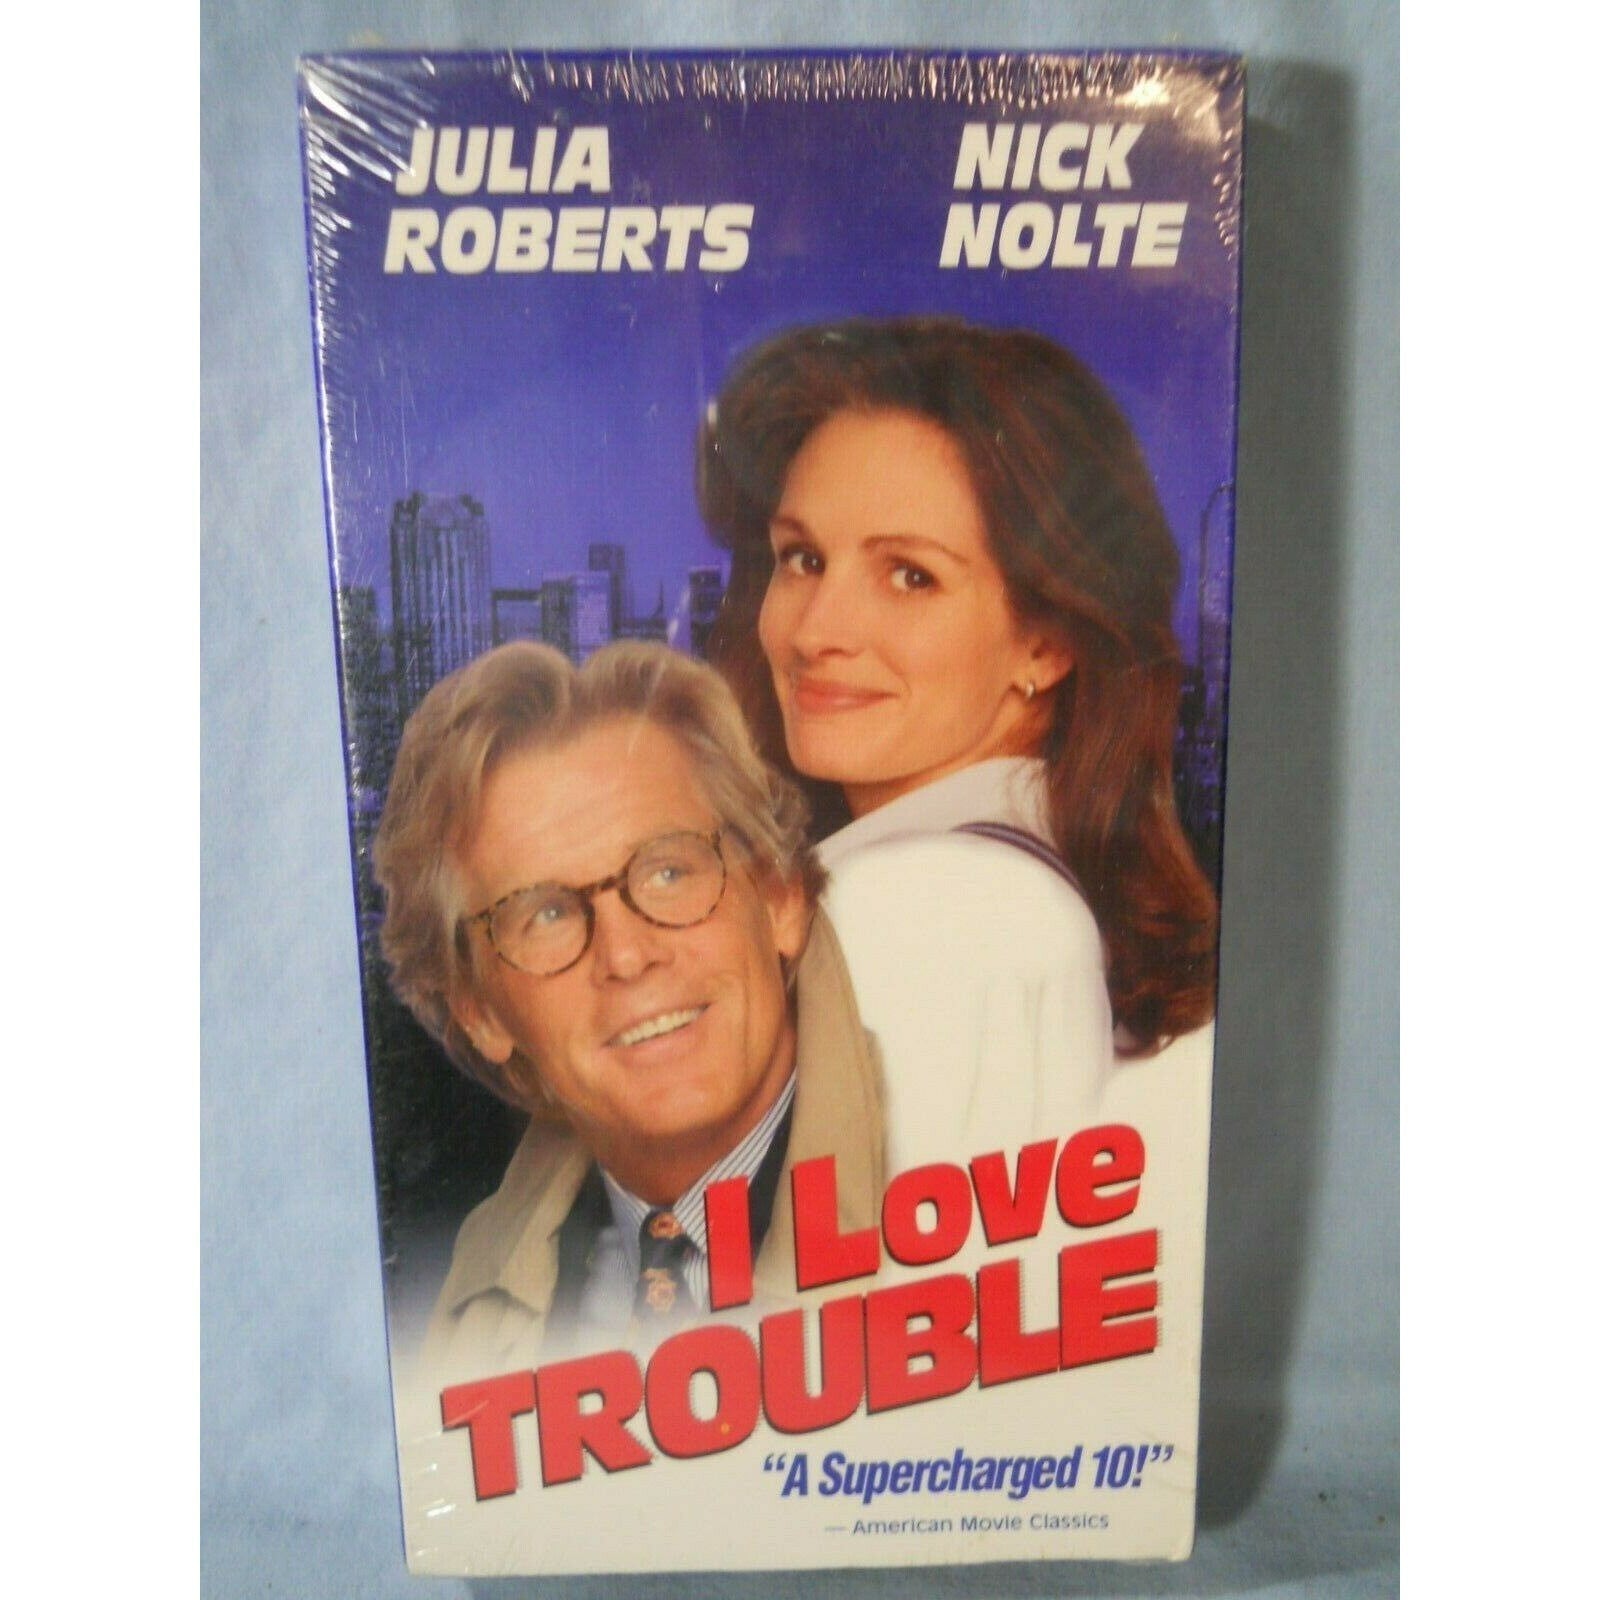 I Love Trouble VHS Tape Factory Sealed Touchstone Home Videos Julia Roberts